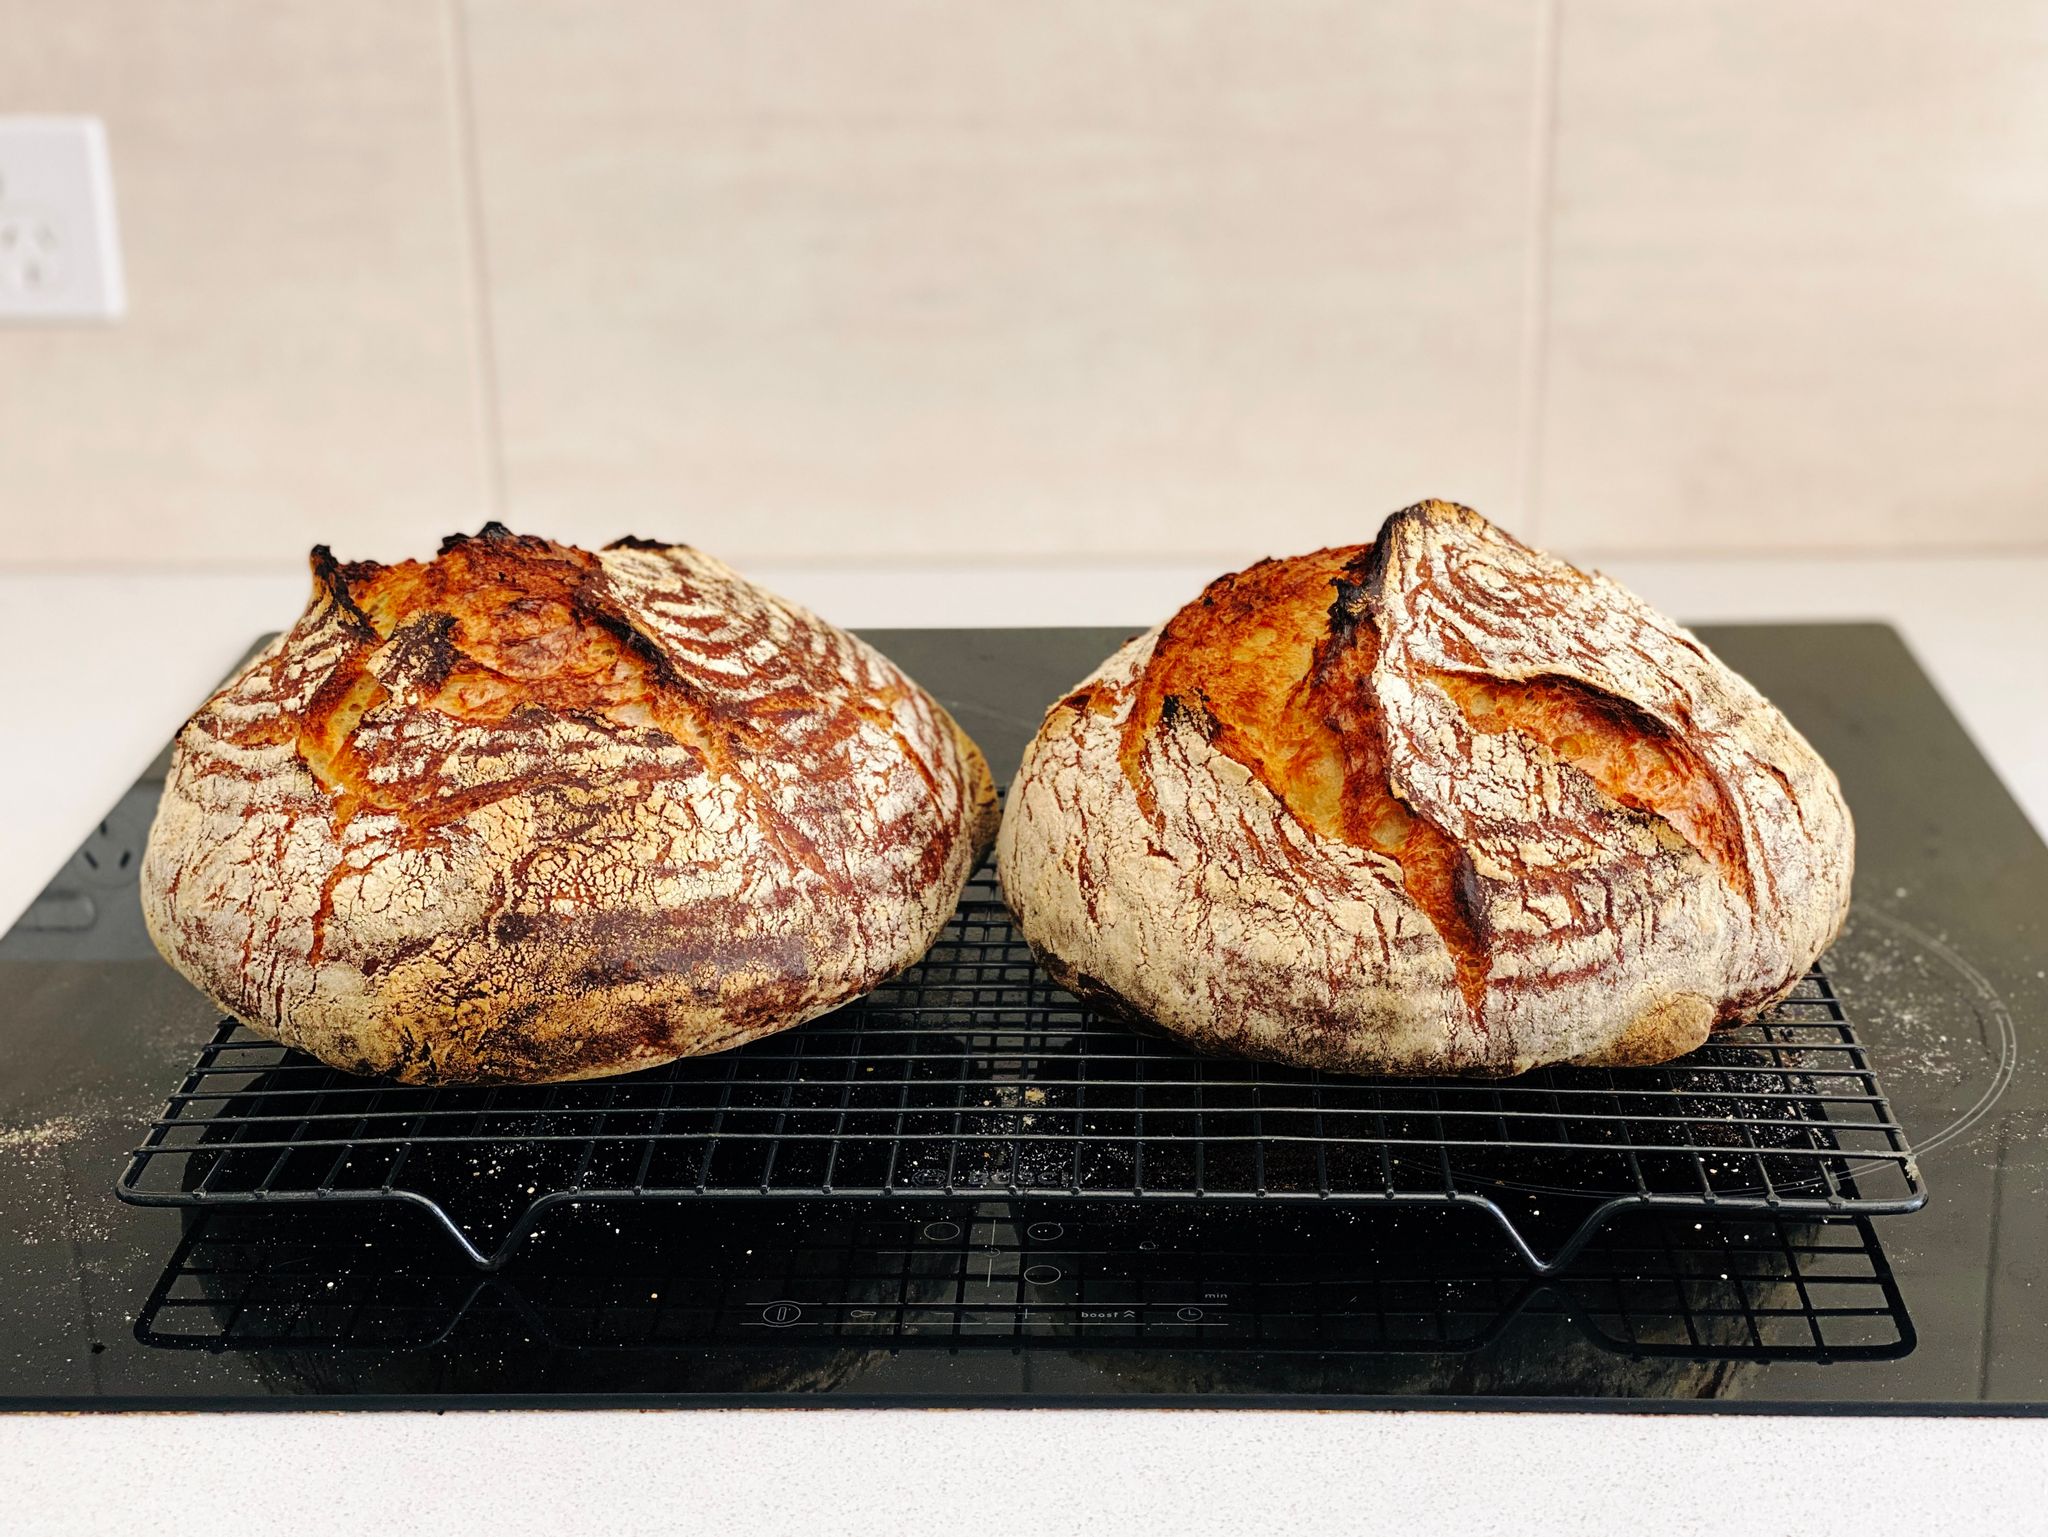 Two round golden brown loaves of bread sitting on a cooling rack. They're nicely tall and have excellent splits, as opposed to last time when they were very much flatter.